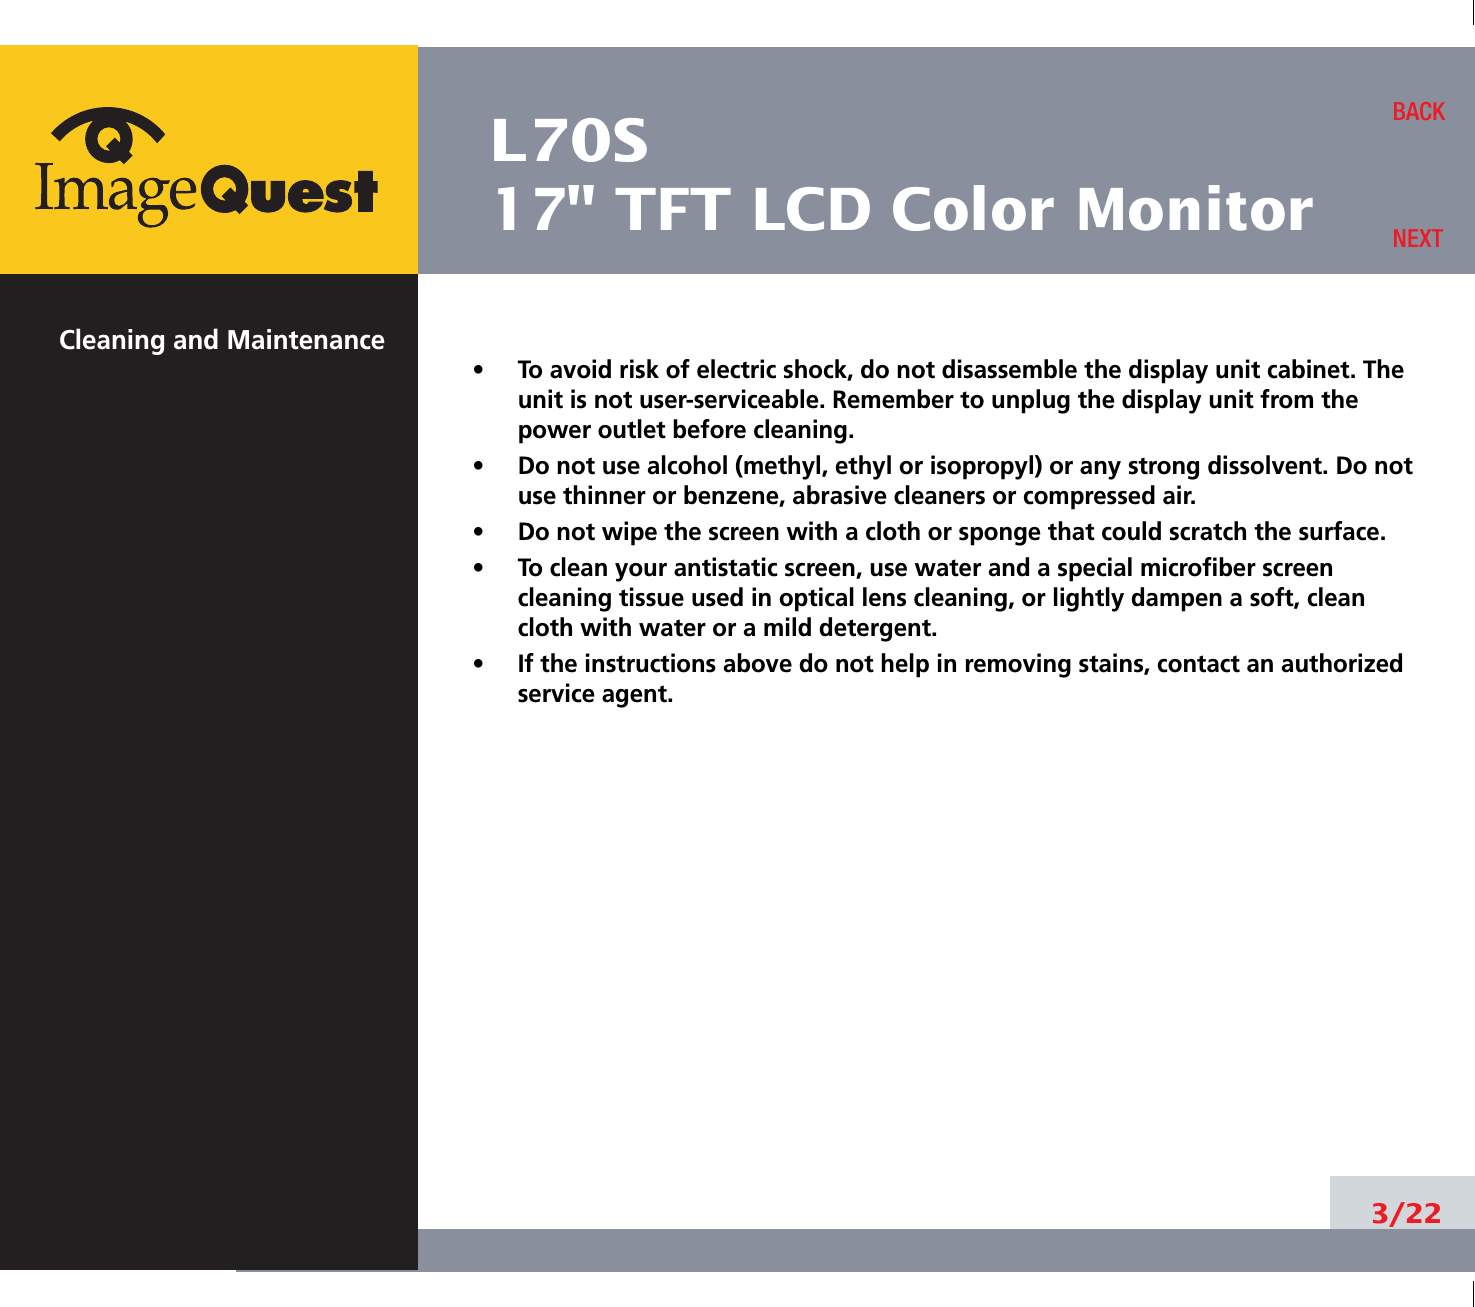 L70S17&quot; TFT LCD Color MonitorCleaning and Maintenance•     To avoid risk of electric shock, do not disassemble the display unit cabinet. Theunit is not user-serviceable. Remember to unplug the display unit from thepower outlet before cleaning.•     Do not use alcohol (methyl, ethyl or isopropyl) or any strong dissolvent. Do notuse thinner or benzene, abrasive cleaners or compressed air.•     Do not wipe the screen with a cloth or sponge that could scratch the surface.•     To clean your antistatic screen, use water and a special microfiber screencleaning tissue used in optical lens cleaning, or lightly dampen a soft, cleancloth with water or a mild detergent.•     If the instructions above do not help in removing stains, contact an authorizedservice agent. 3/22BACKNEXT